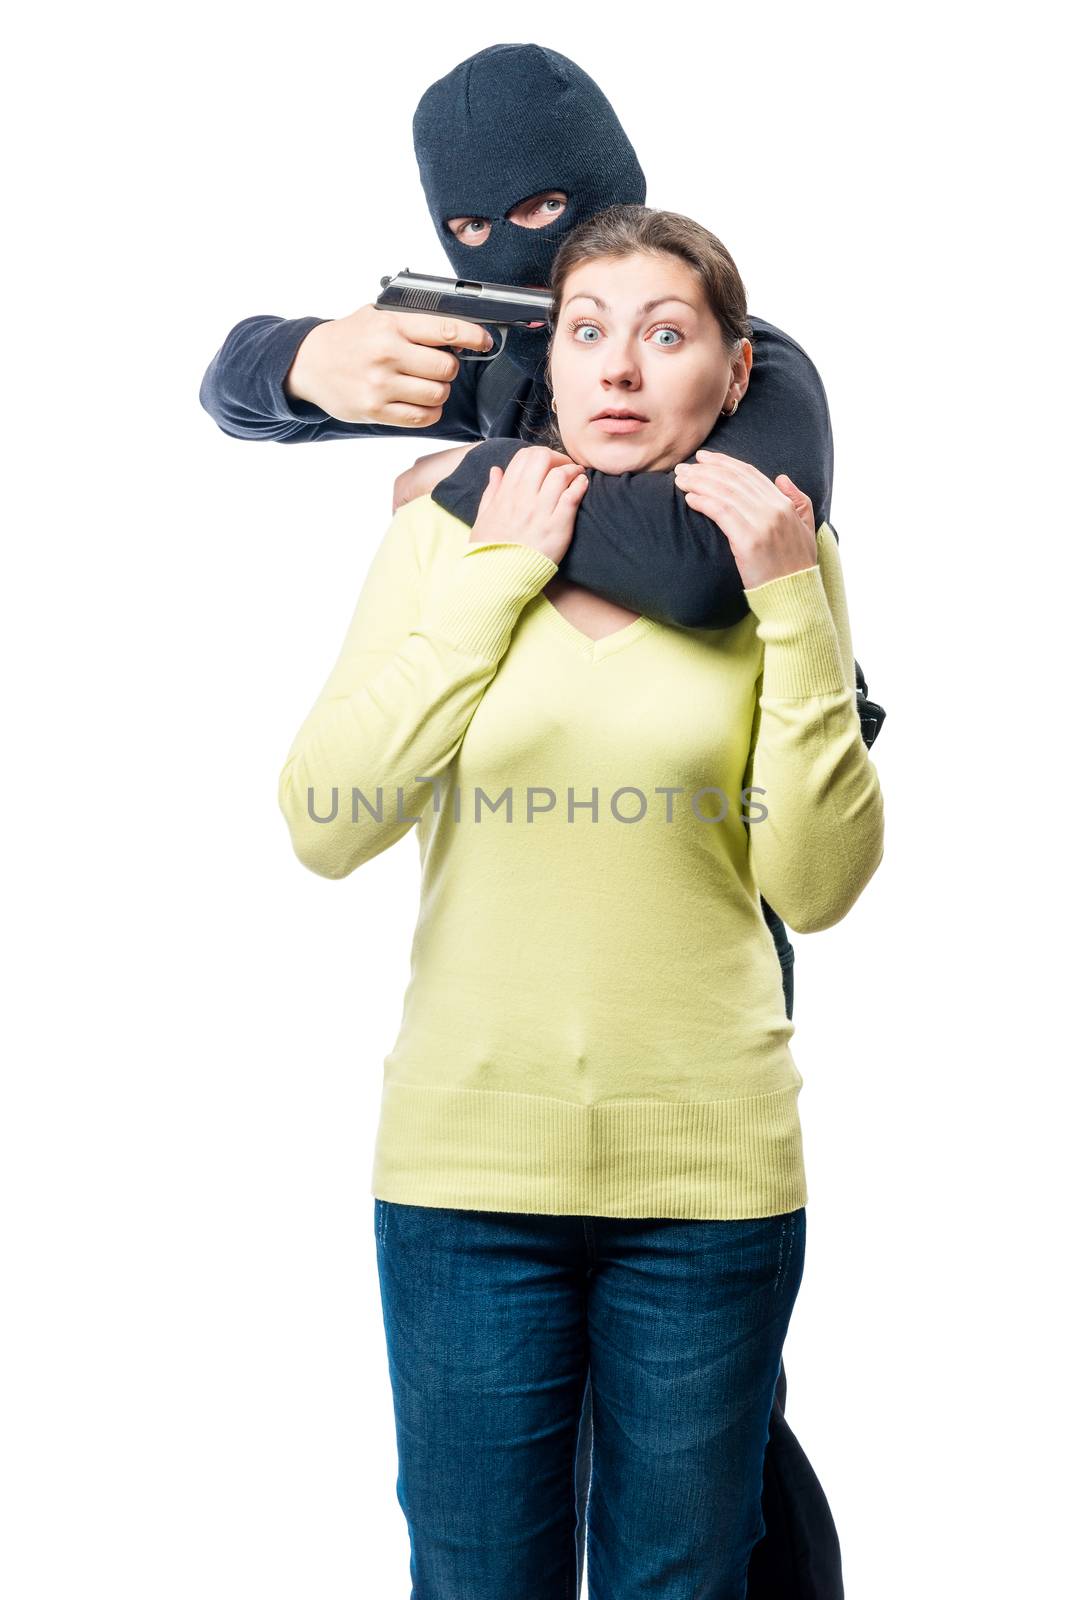 A dangerous criminal with arms and a young woman on a white background